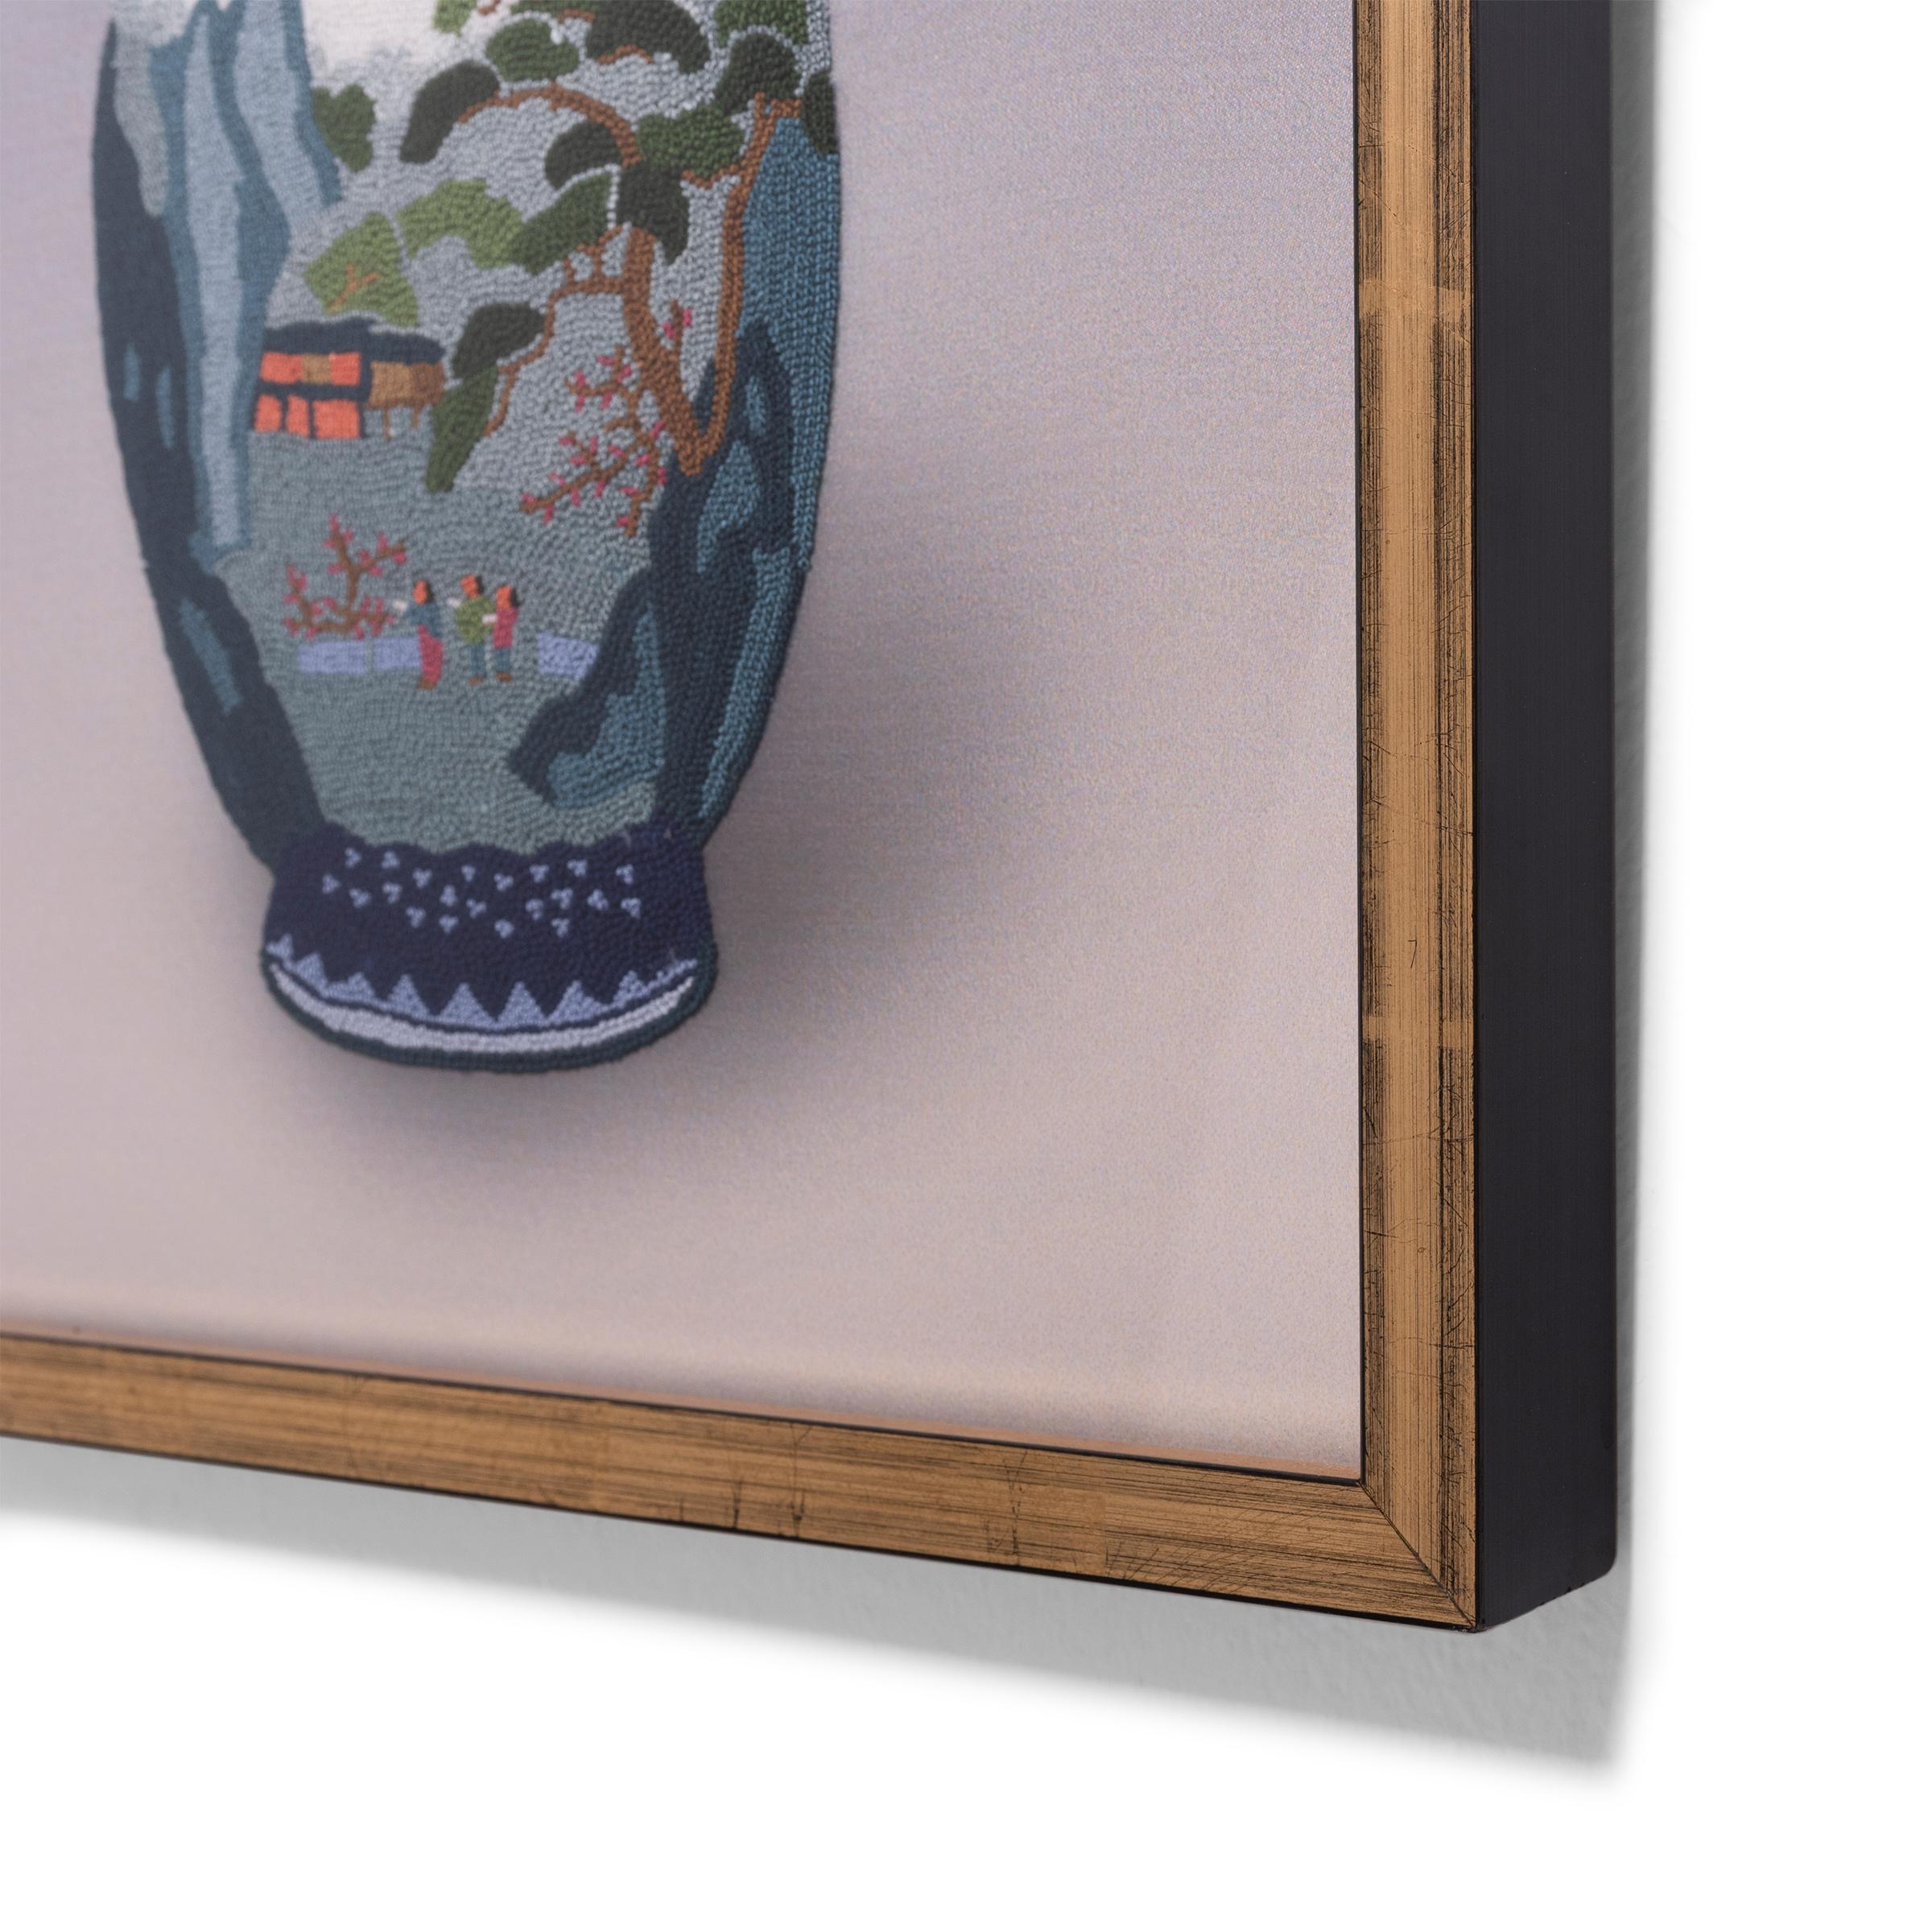 Contemporary Chinese Forbidden Stitch Embroidery of a Shan Shui Vase For Sale